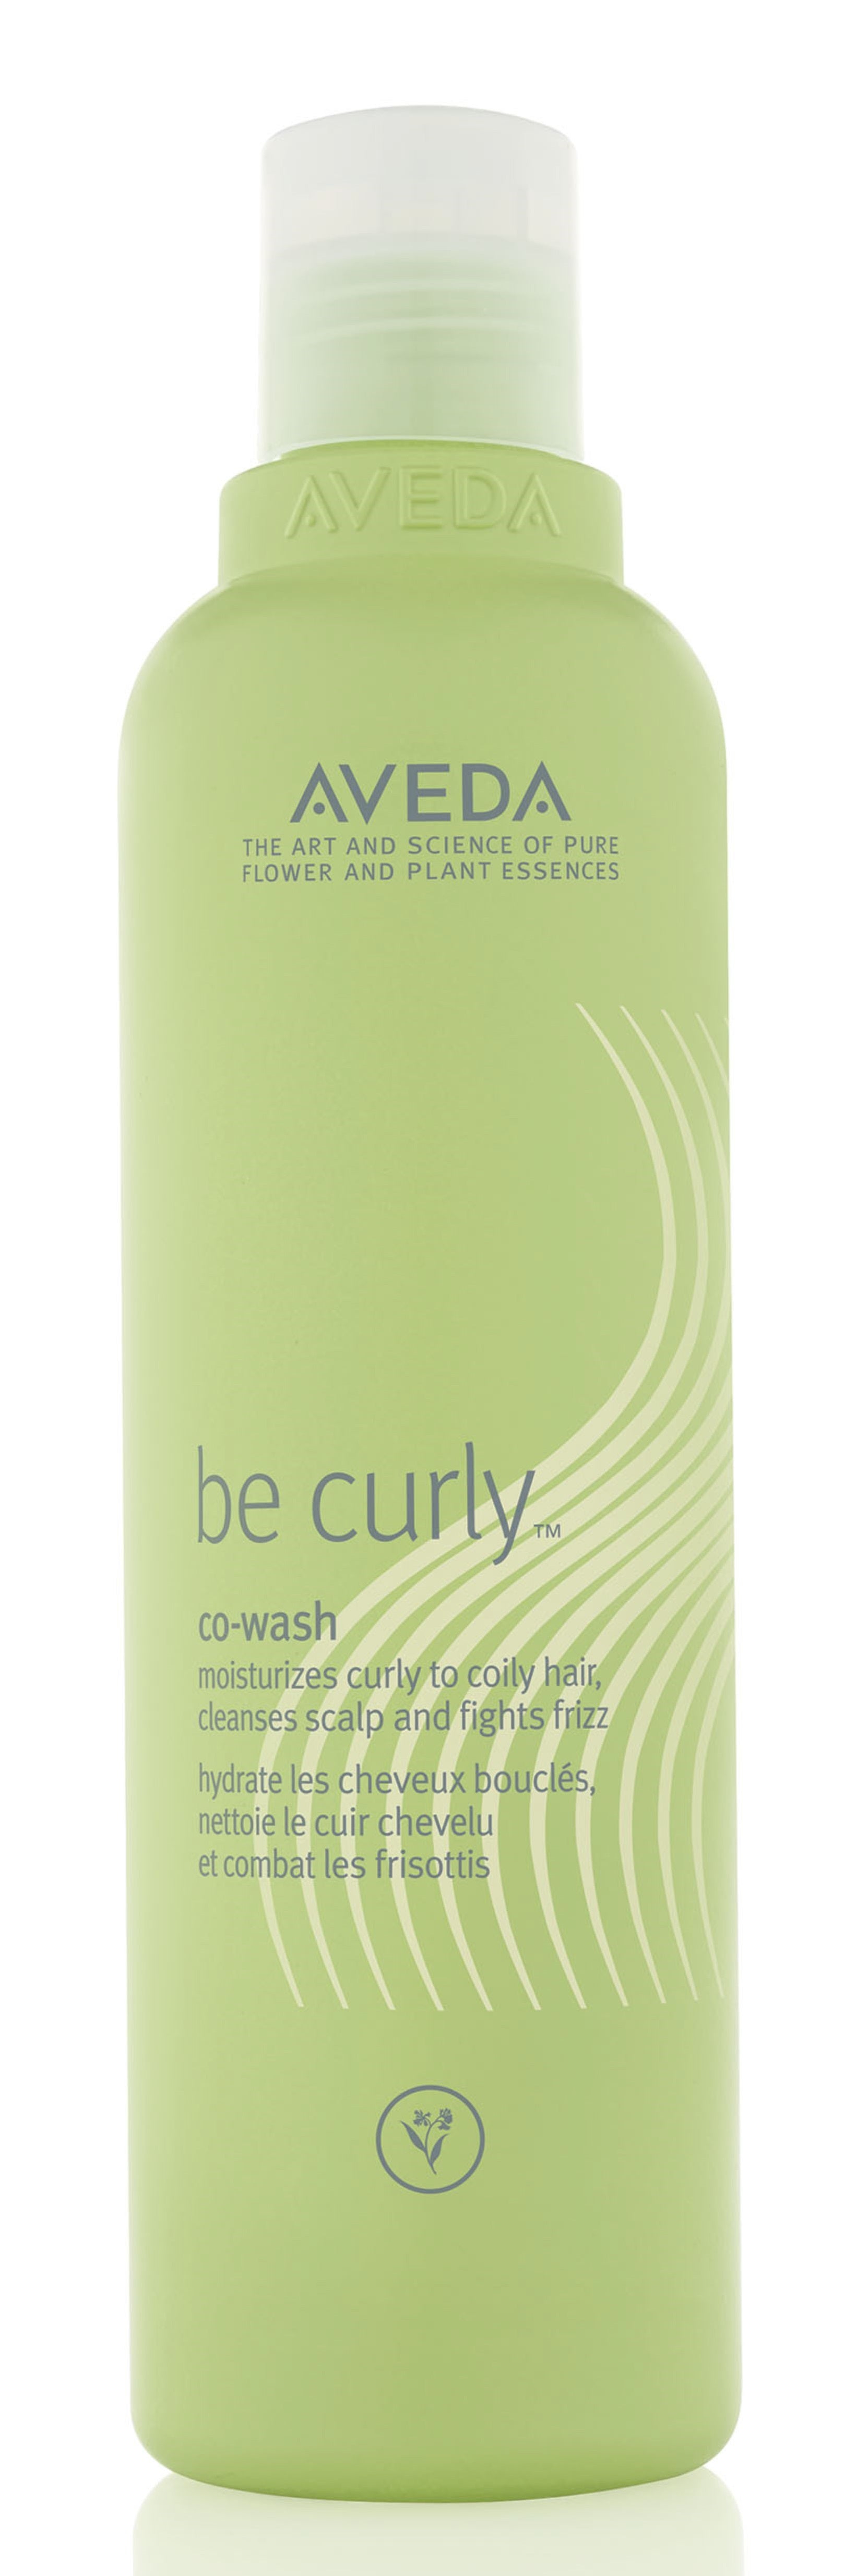 Aveda Be Curly Co Wash (8.5 oz)